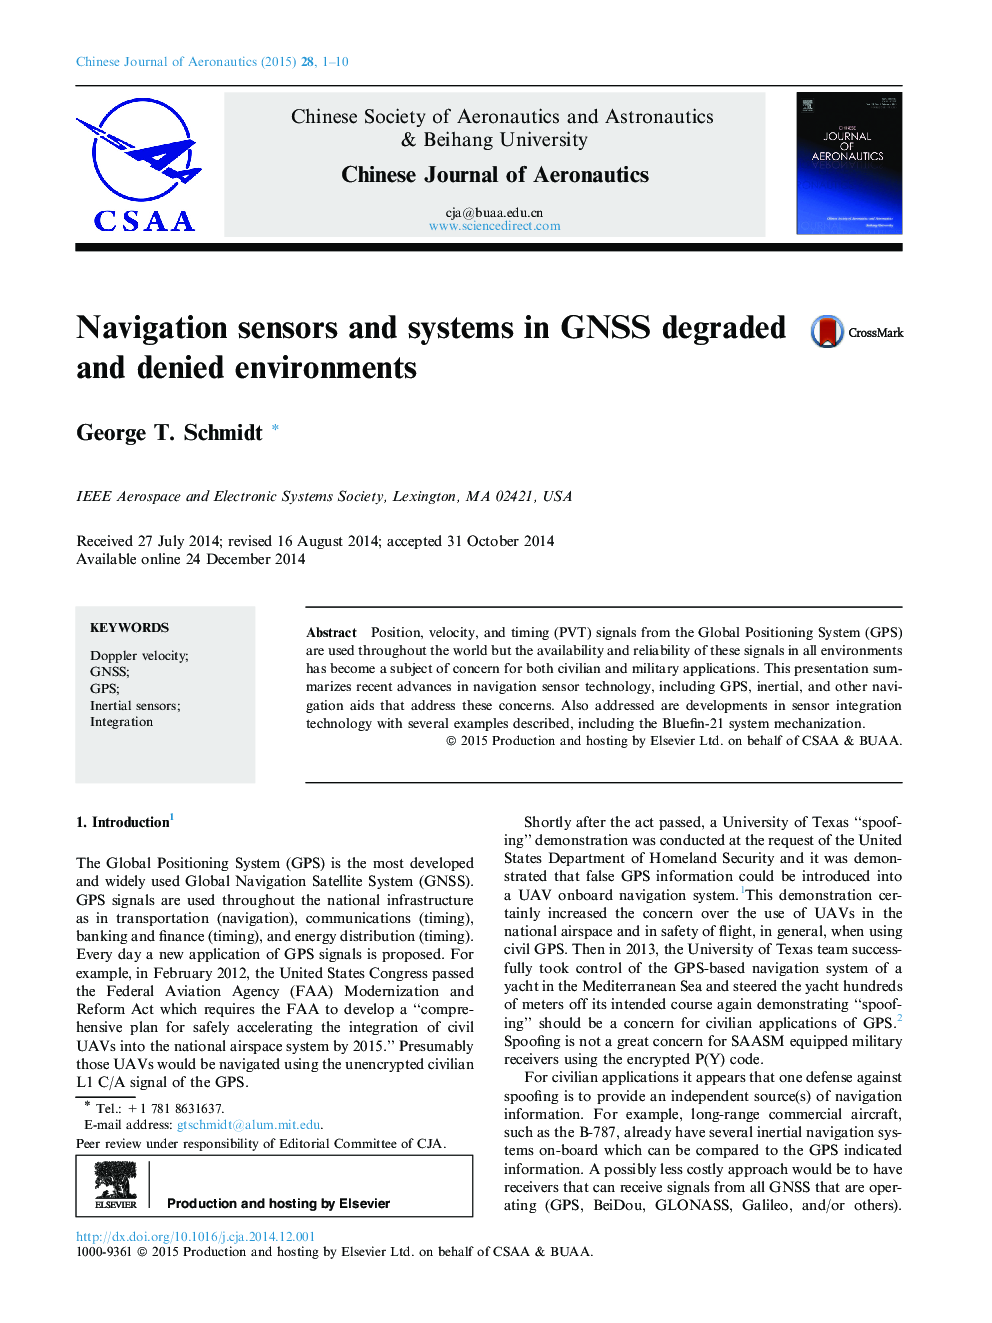 Navigation sensors and systems in GNSS degraded and denied environments 